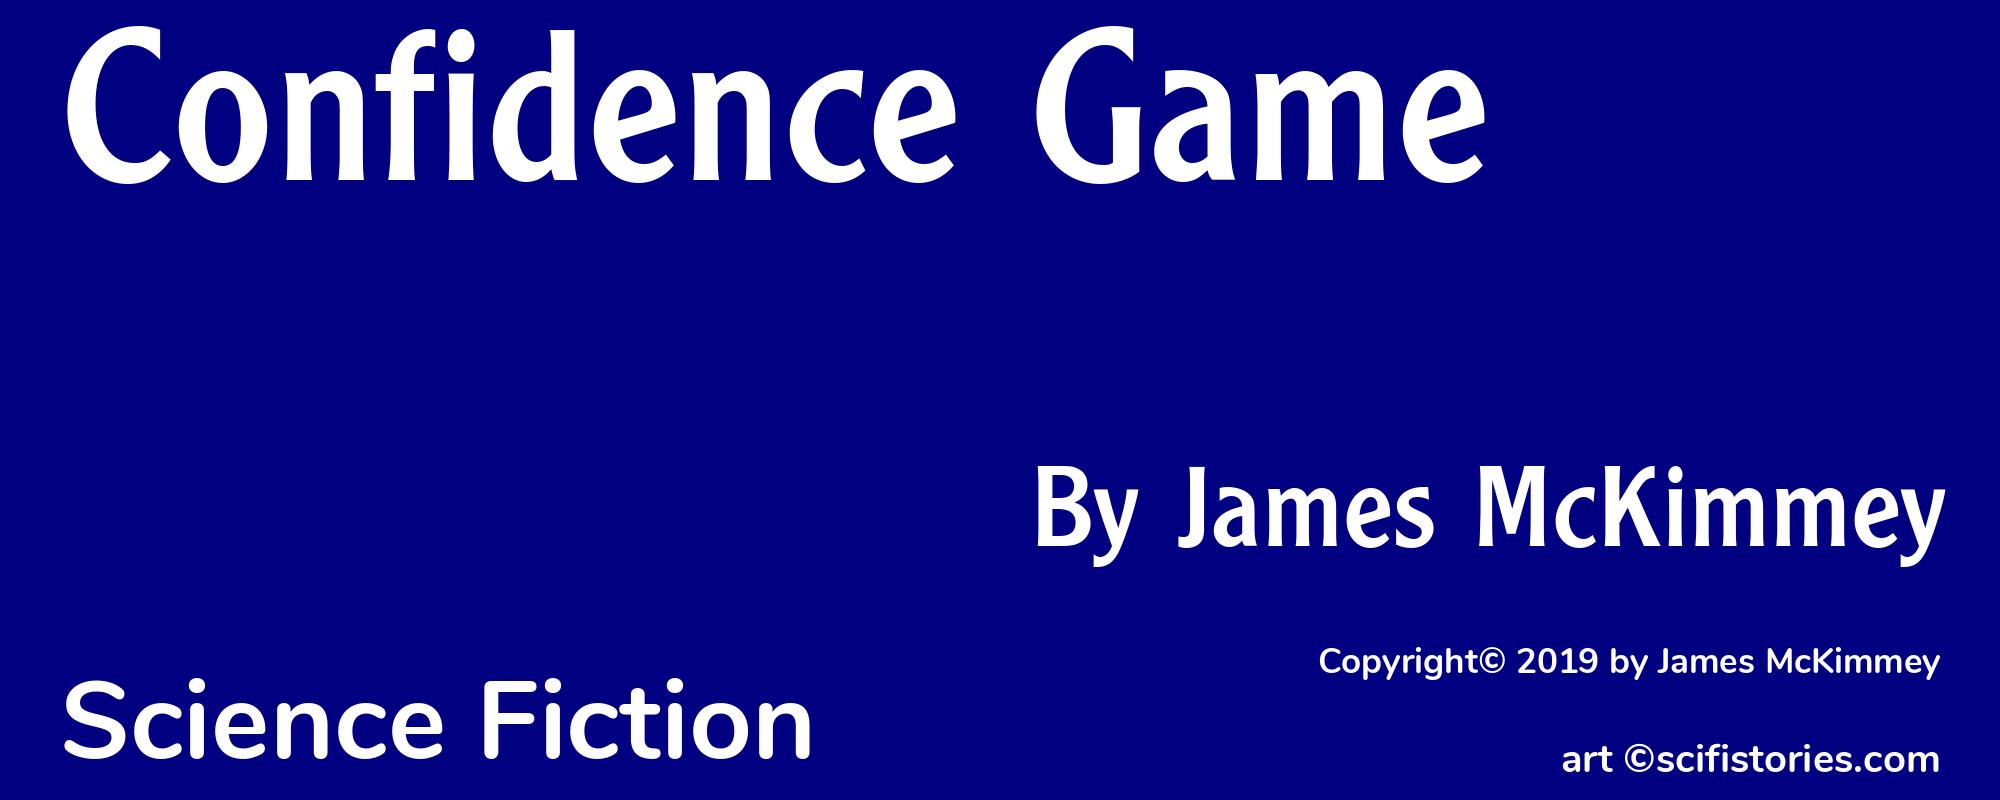 Confidence Game - Cover